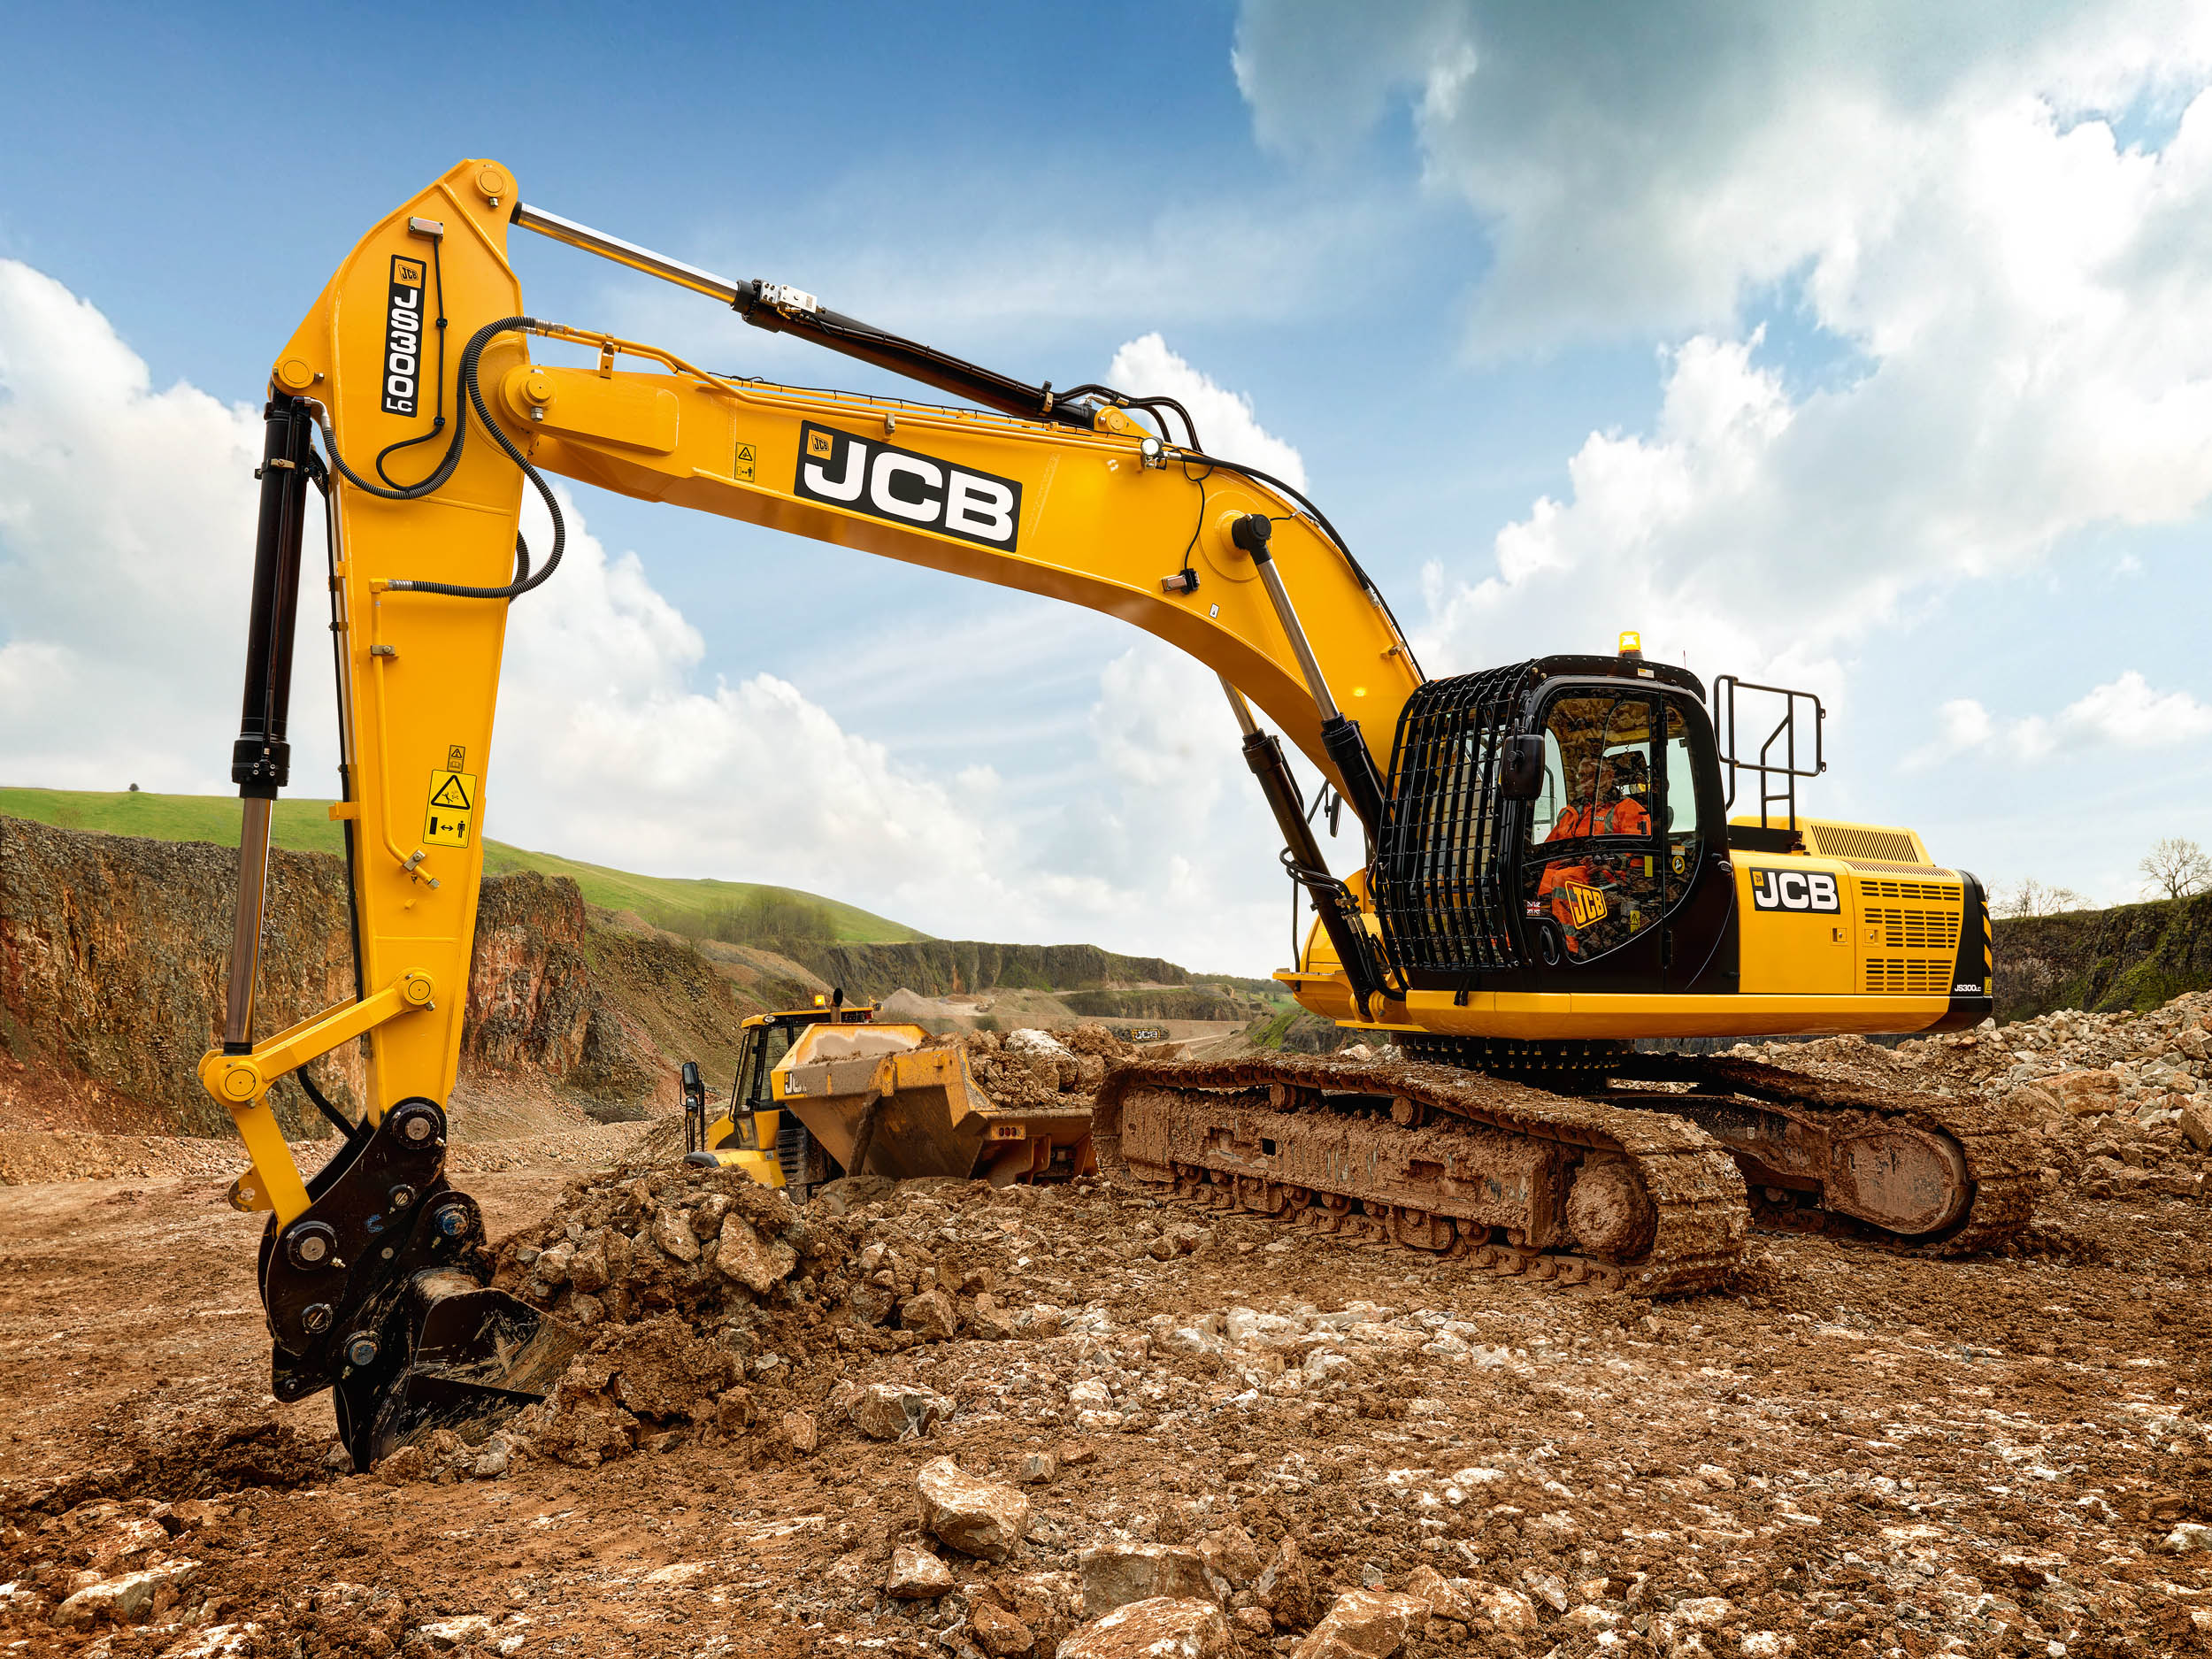 Efficiency & emissions in mind for the JS300 Excavator